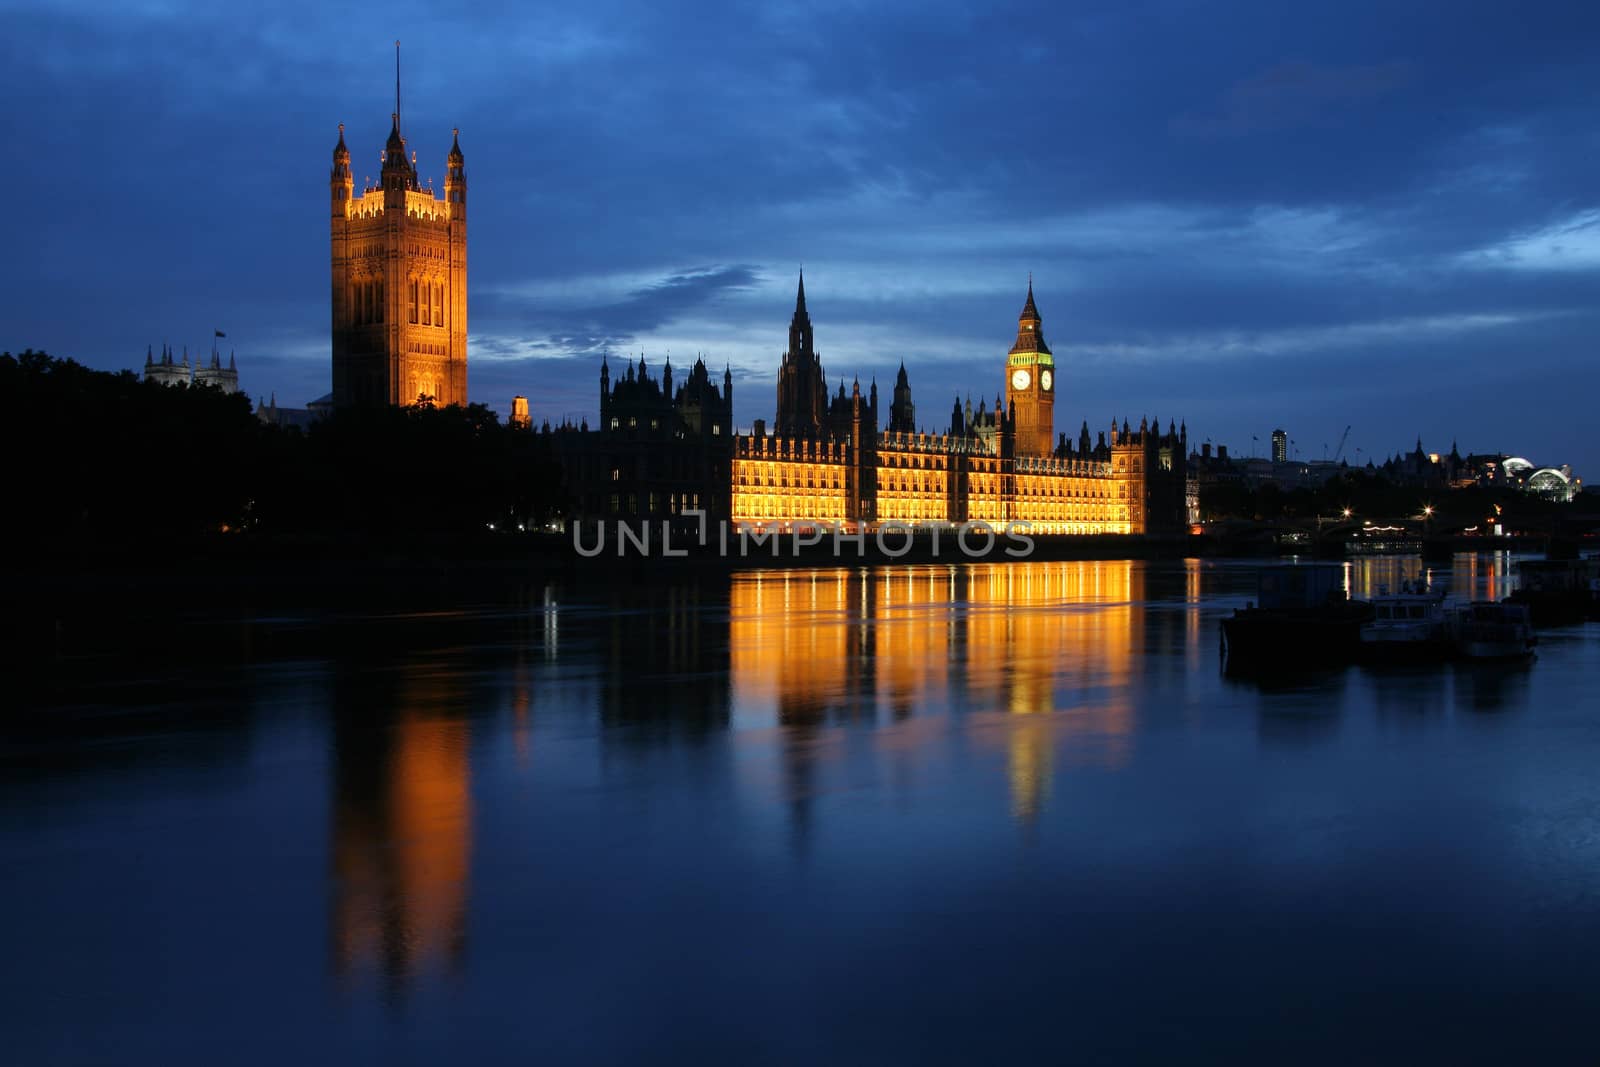 Dusk view of the Houses of Parliament and the River Thames
